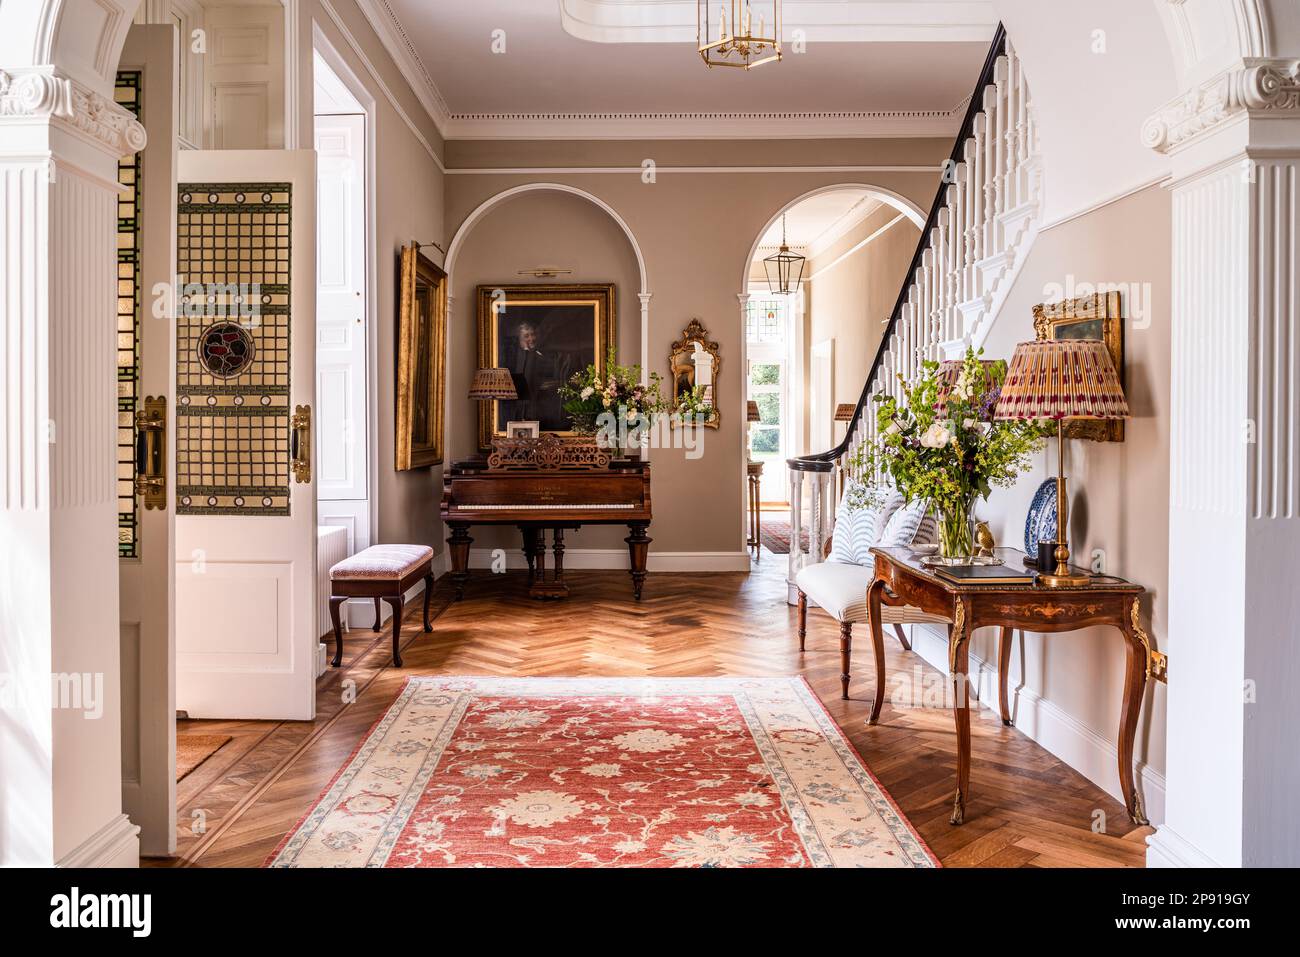 Patterned rug in doorway of 18th century Grade II listed Suffolk country house, UK Stock Photo